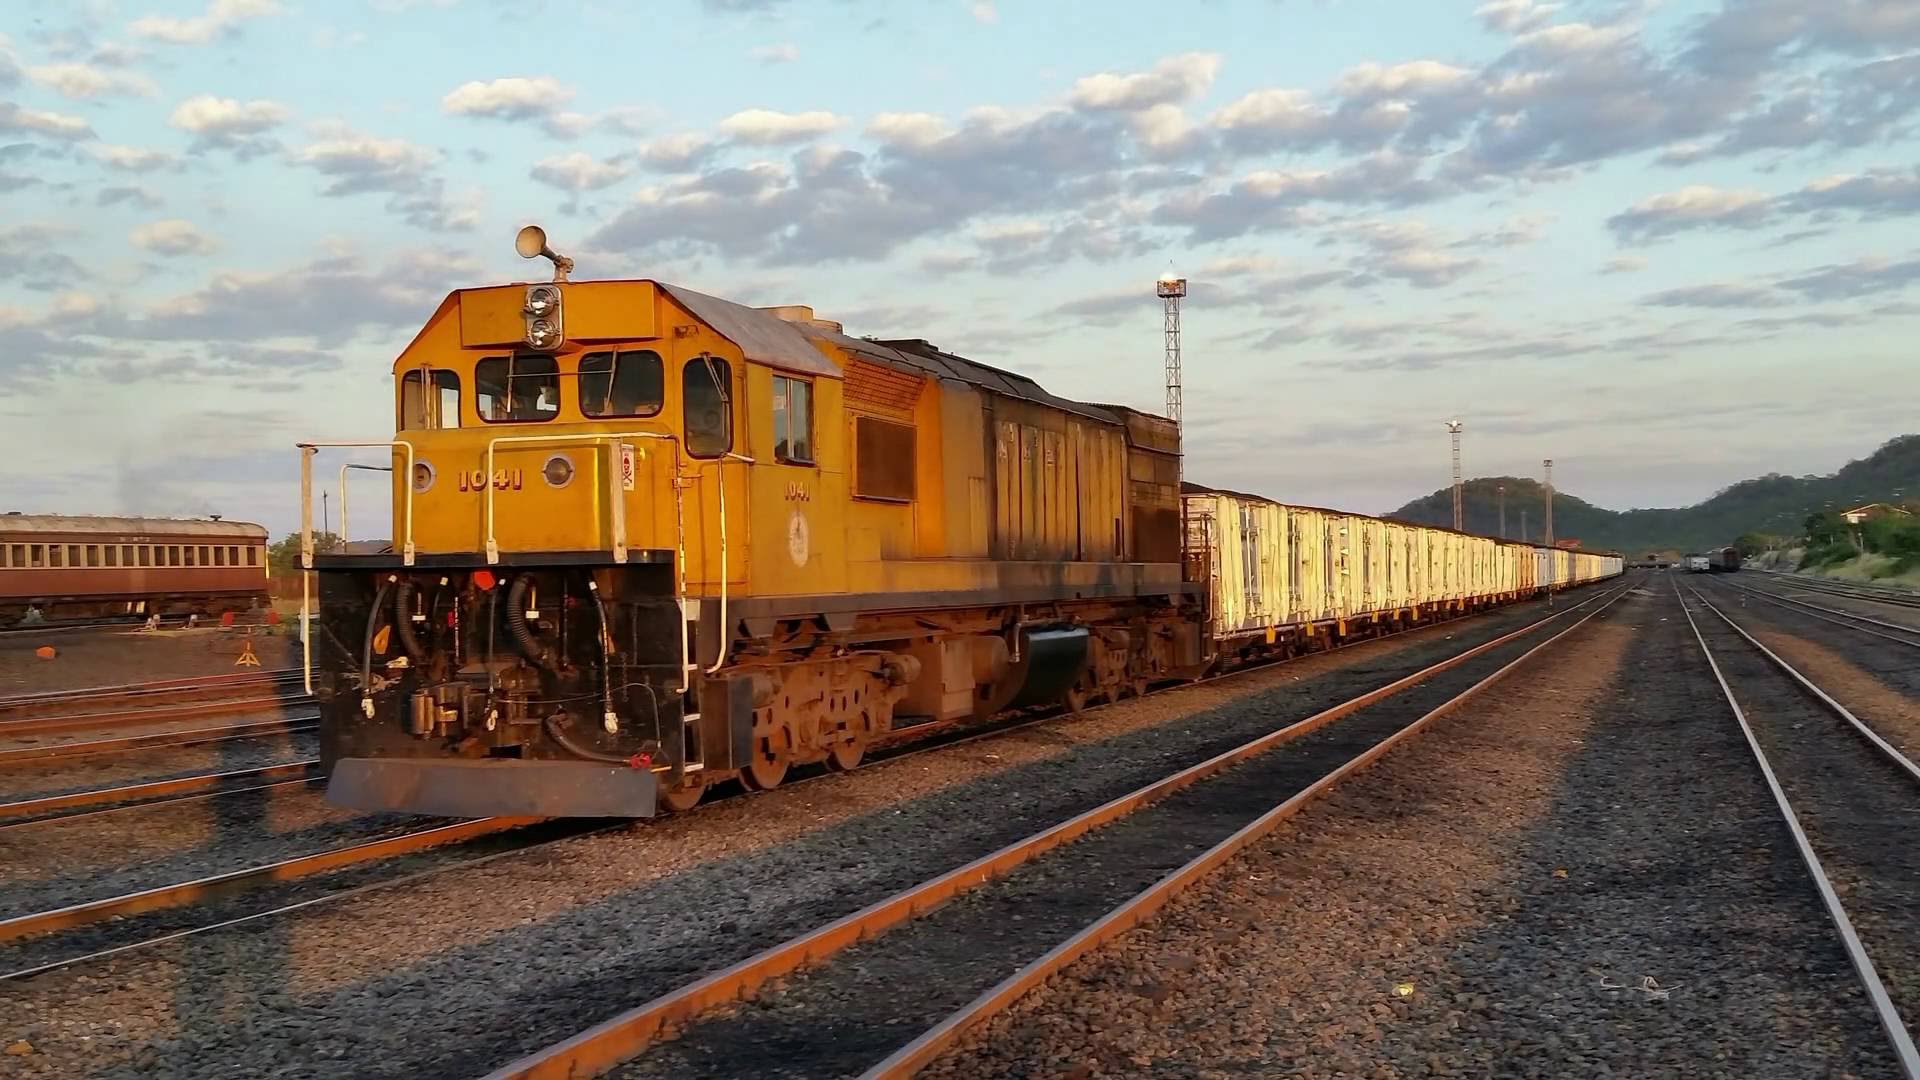 NRZ resuscitation at an advanced stage